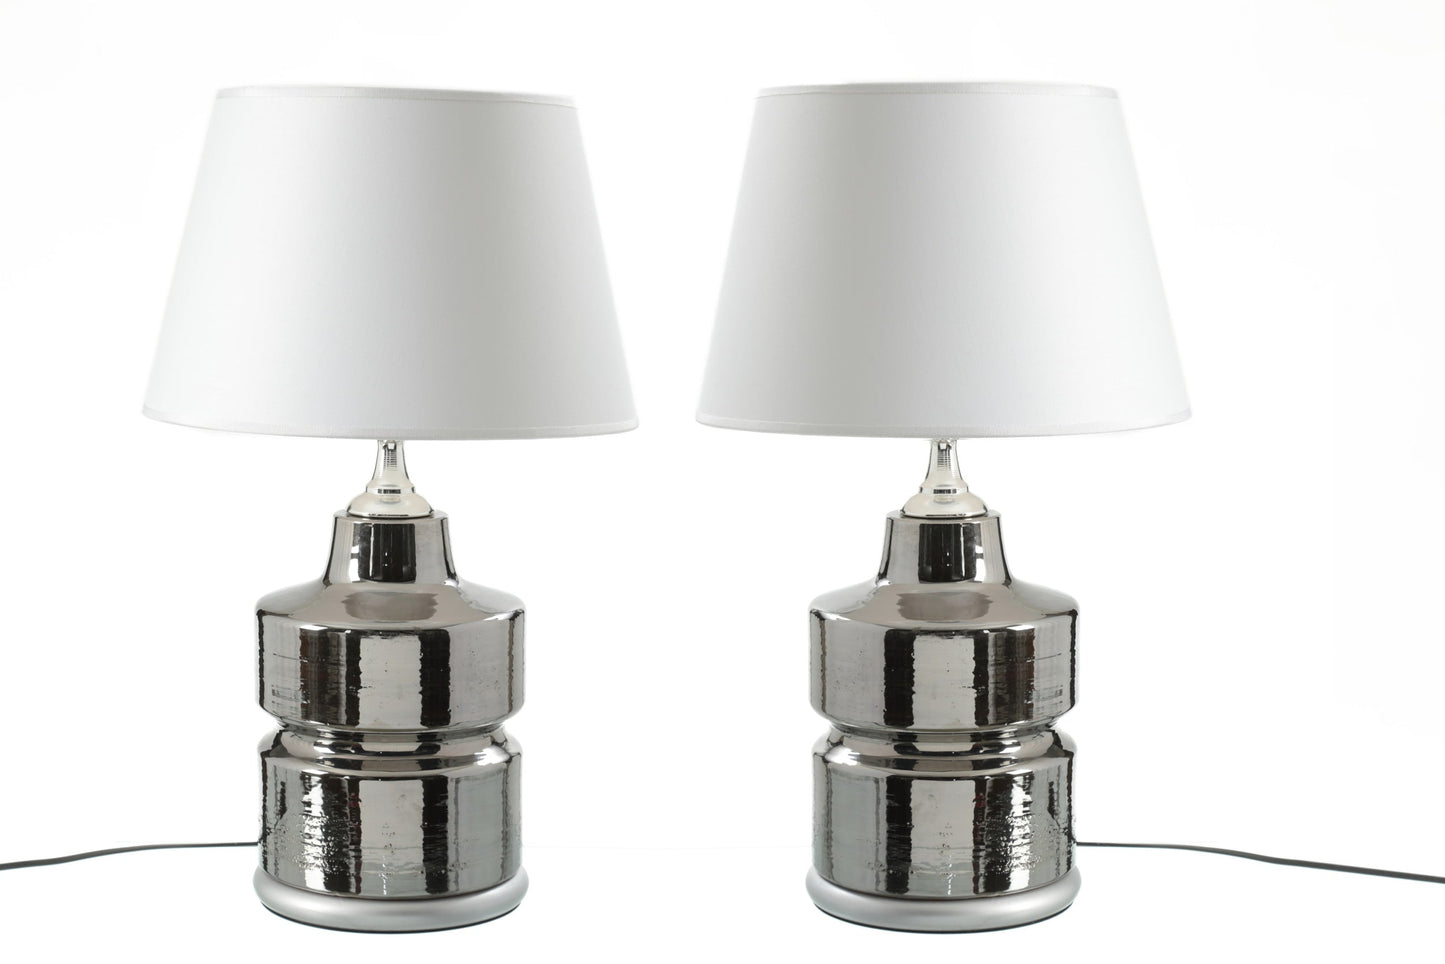 Pair of table lamps from the 70s in silver ceramic